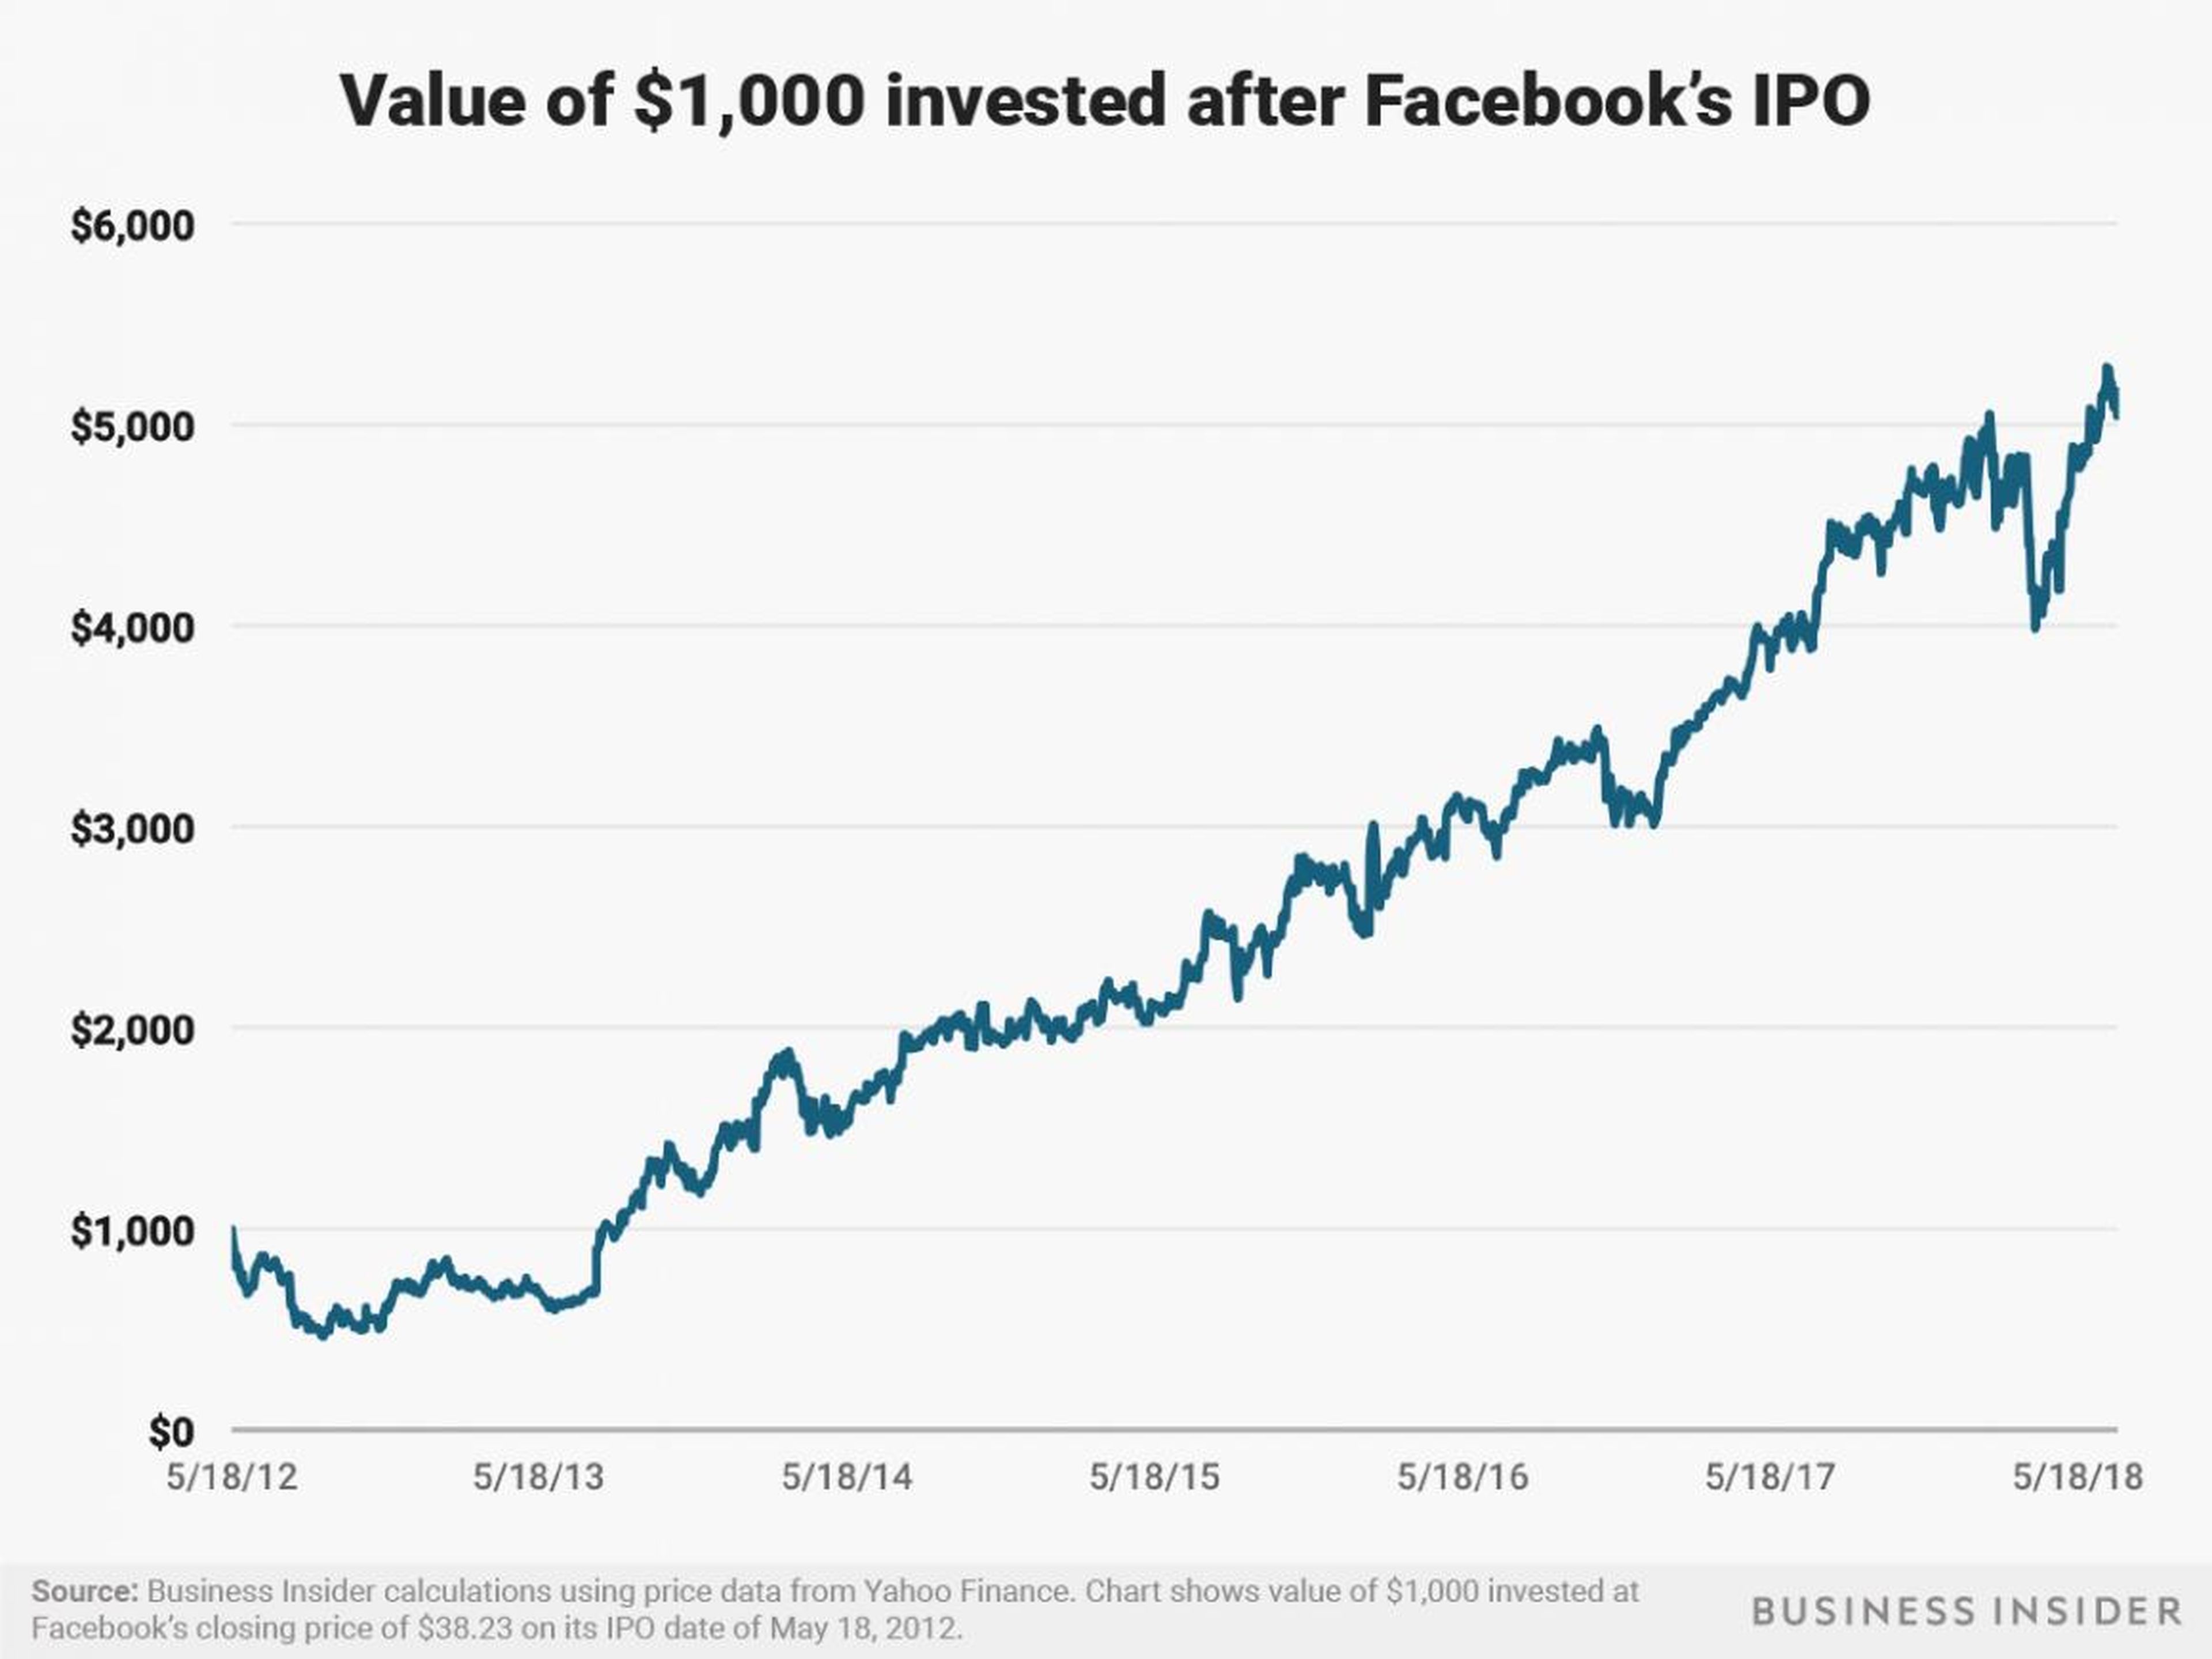 A $1,000 investment in Facebook after its May 18, 2012 IPO would be worth over $5,000 as of July 3, 2018.